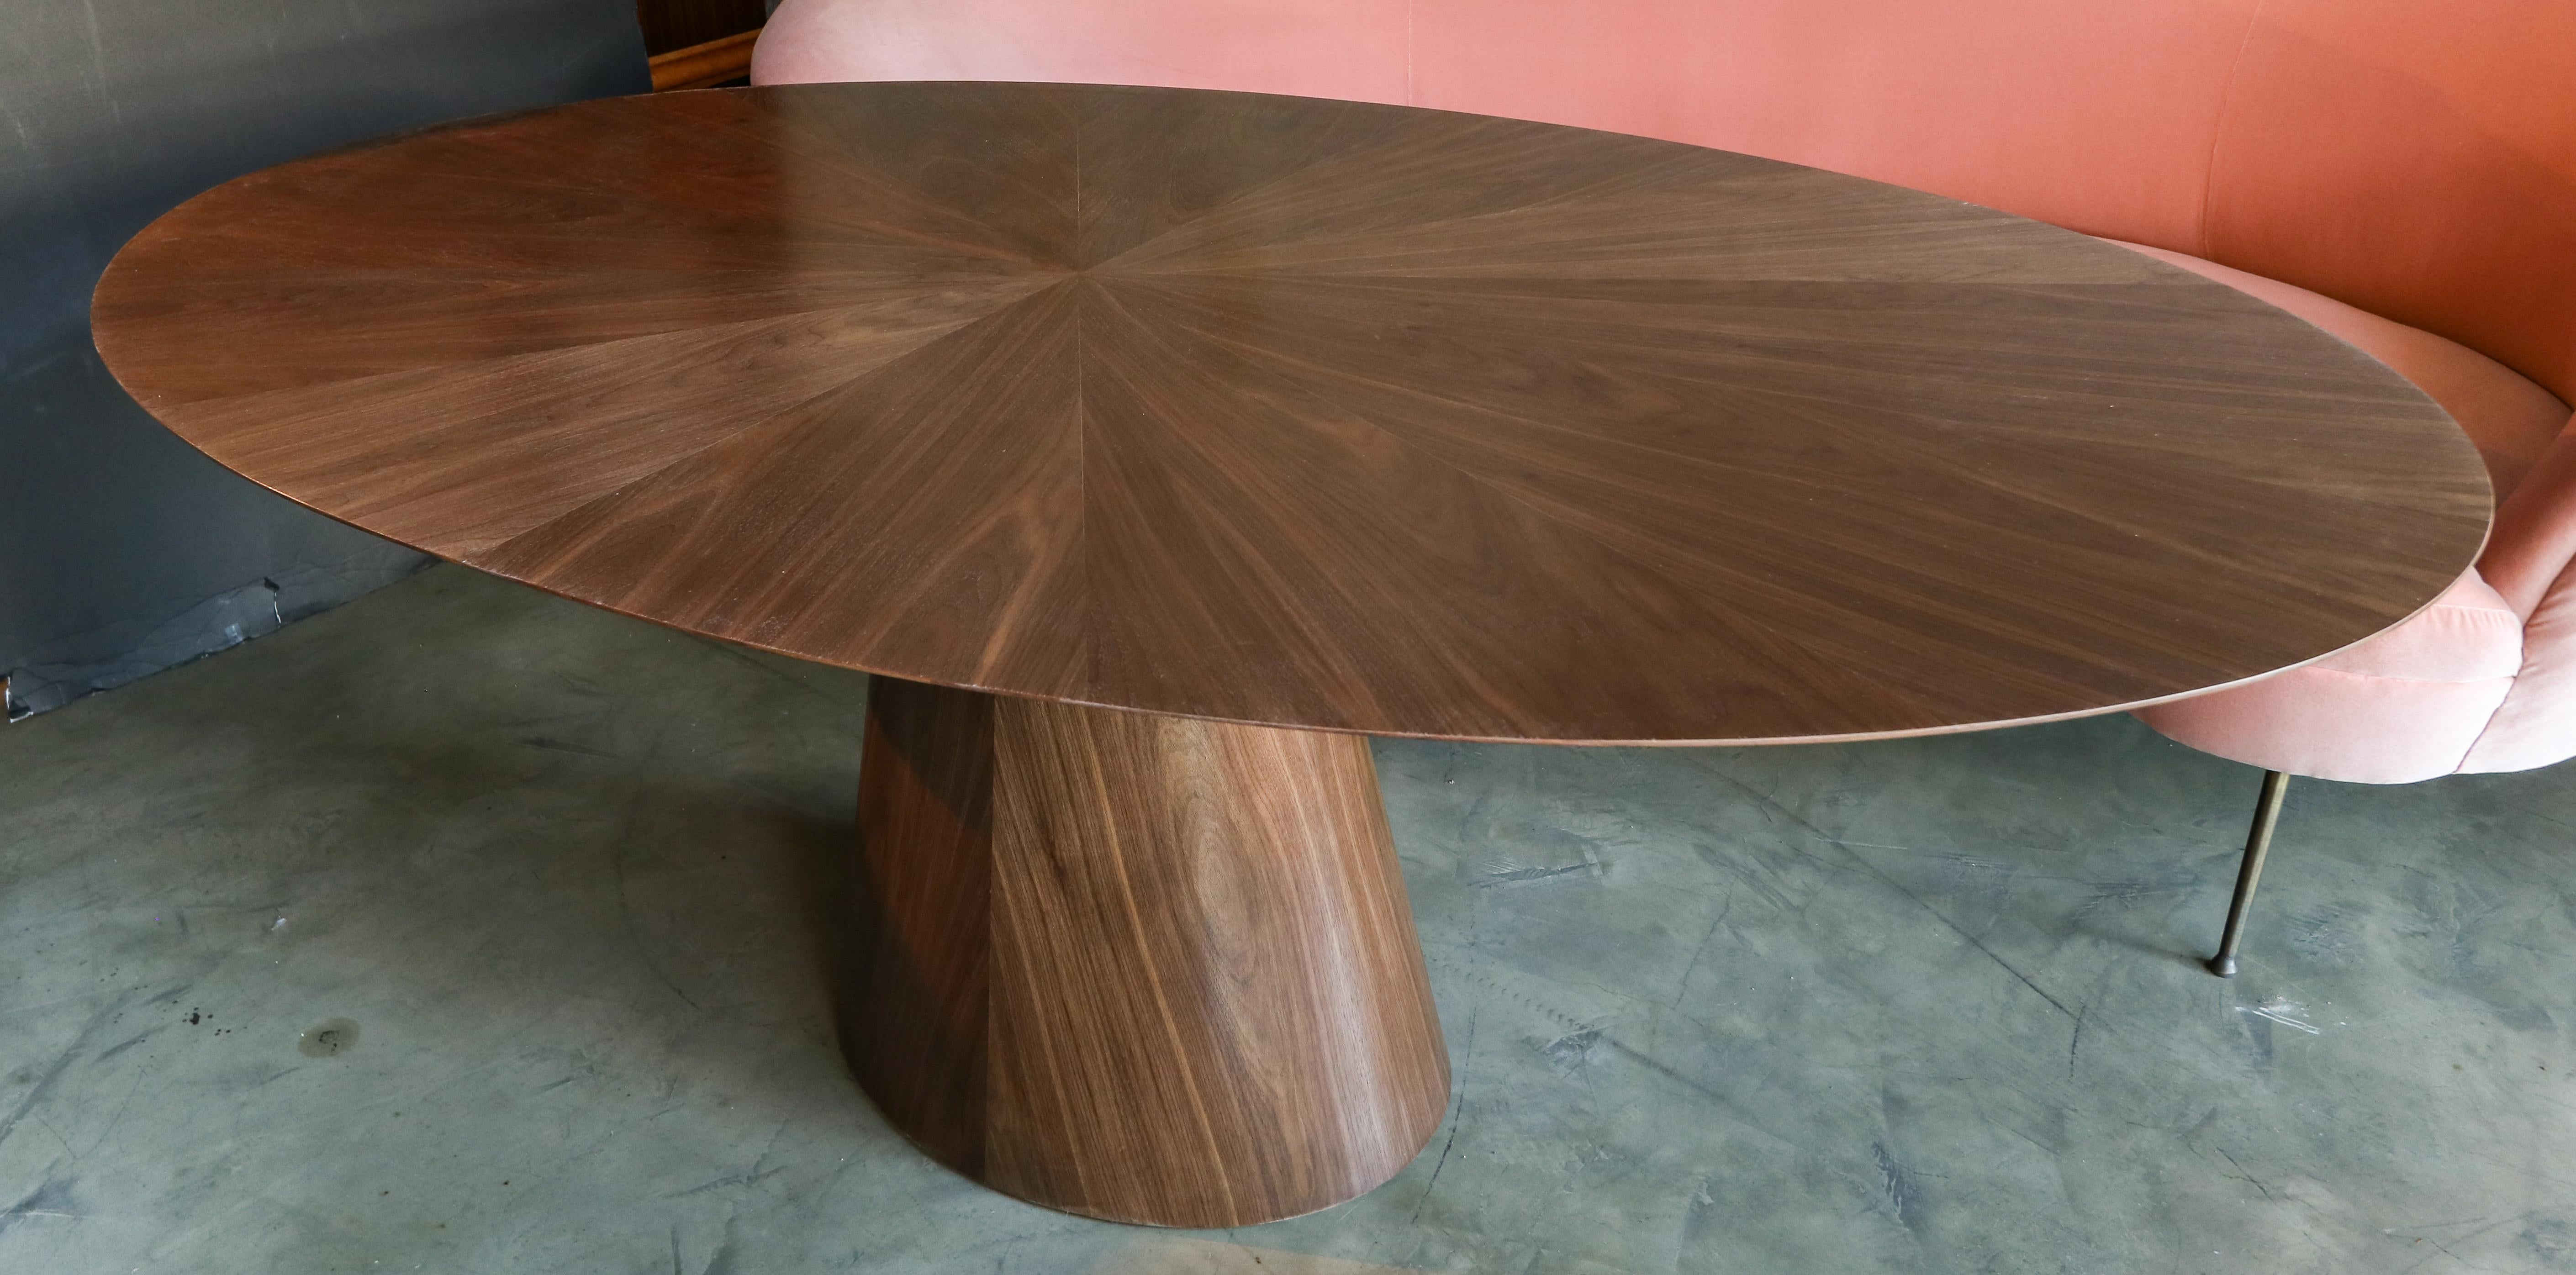 Custom oval dining table with pedestal leg made in American walnut.  Made in Los Angeles by Adesso Imports.

Can be done in different woods, finishes and sizes.